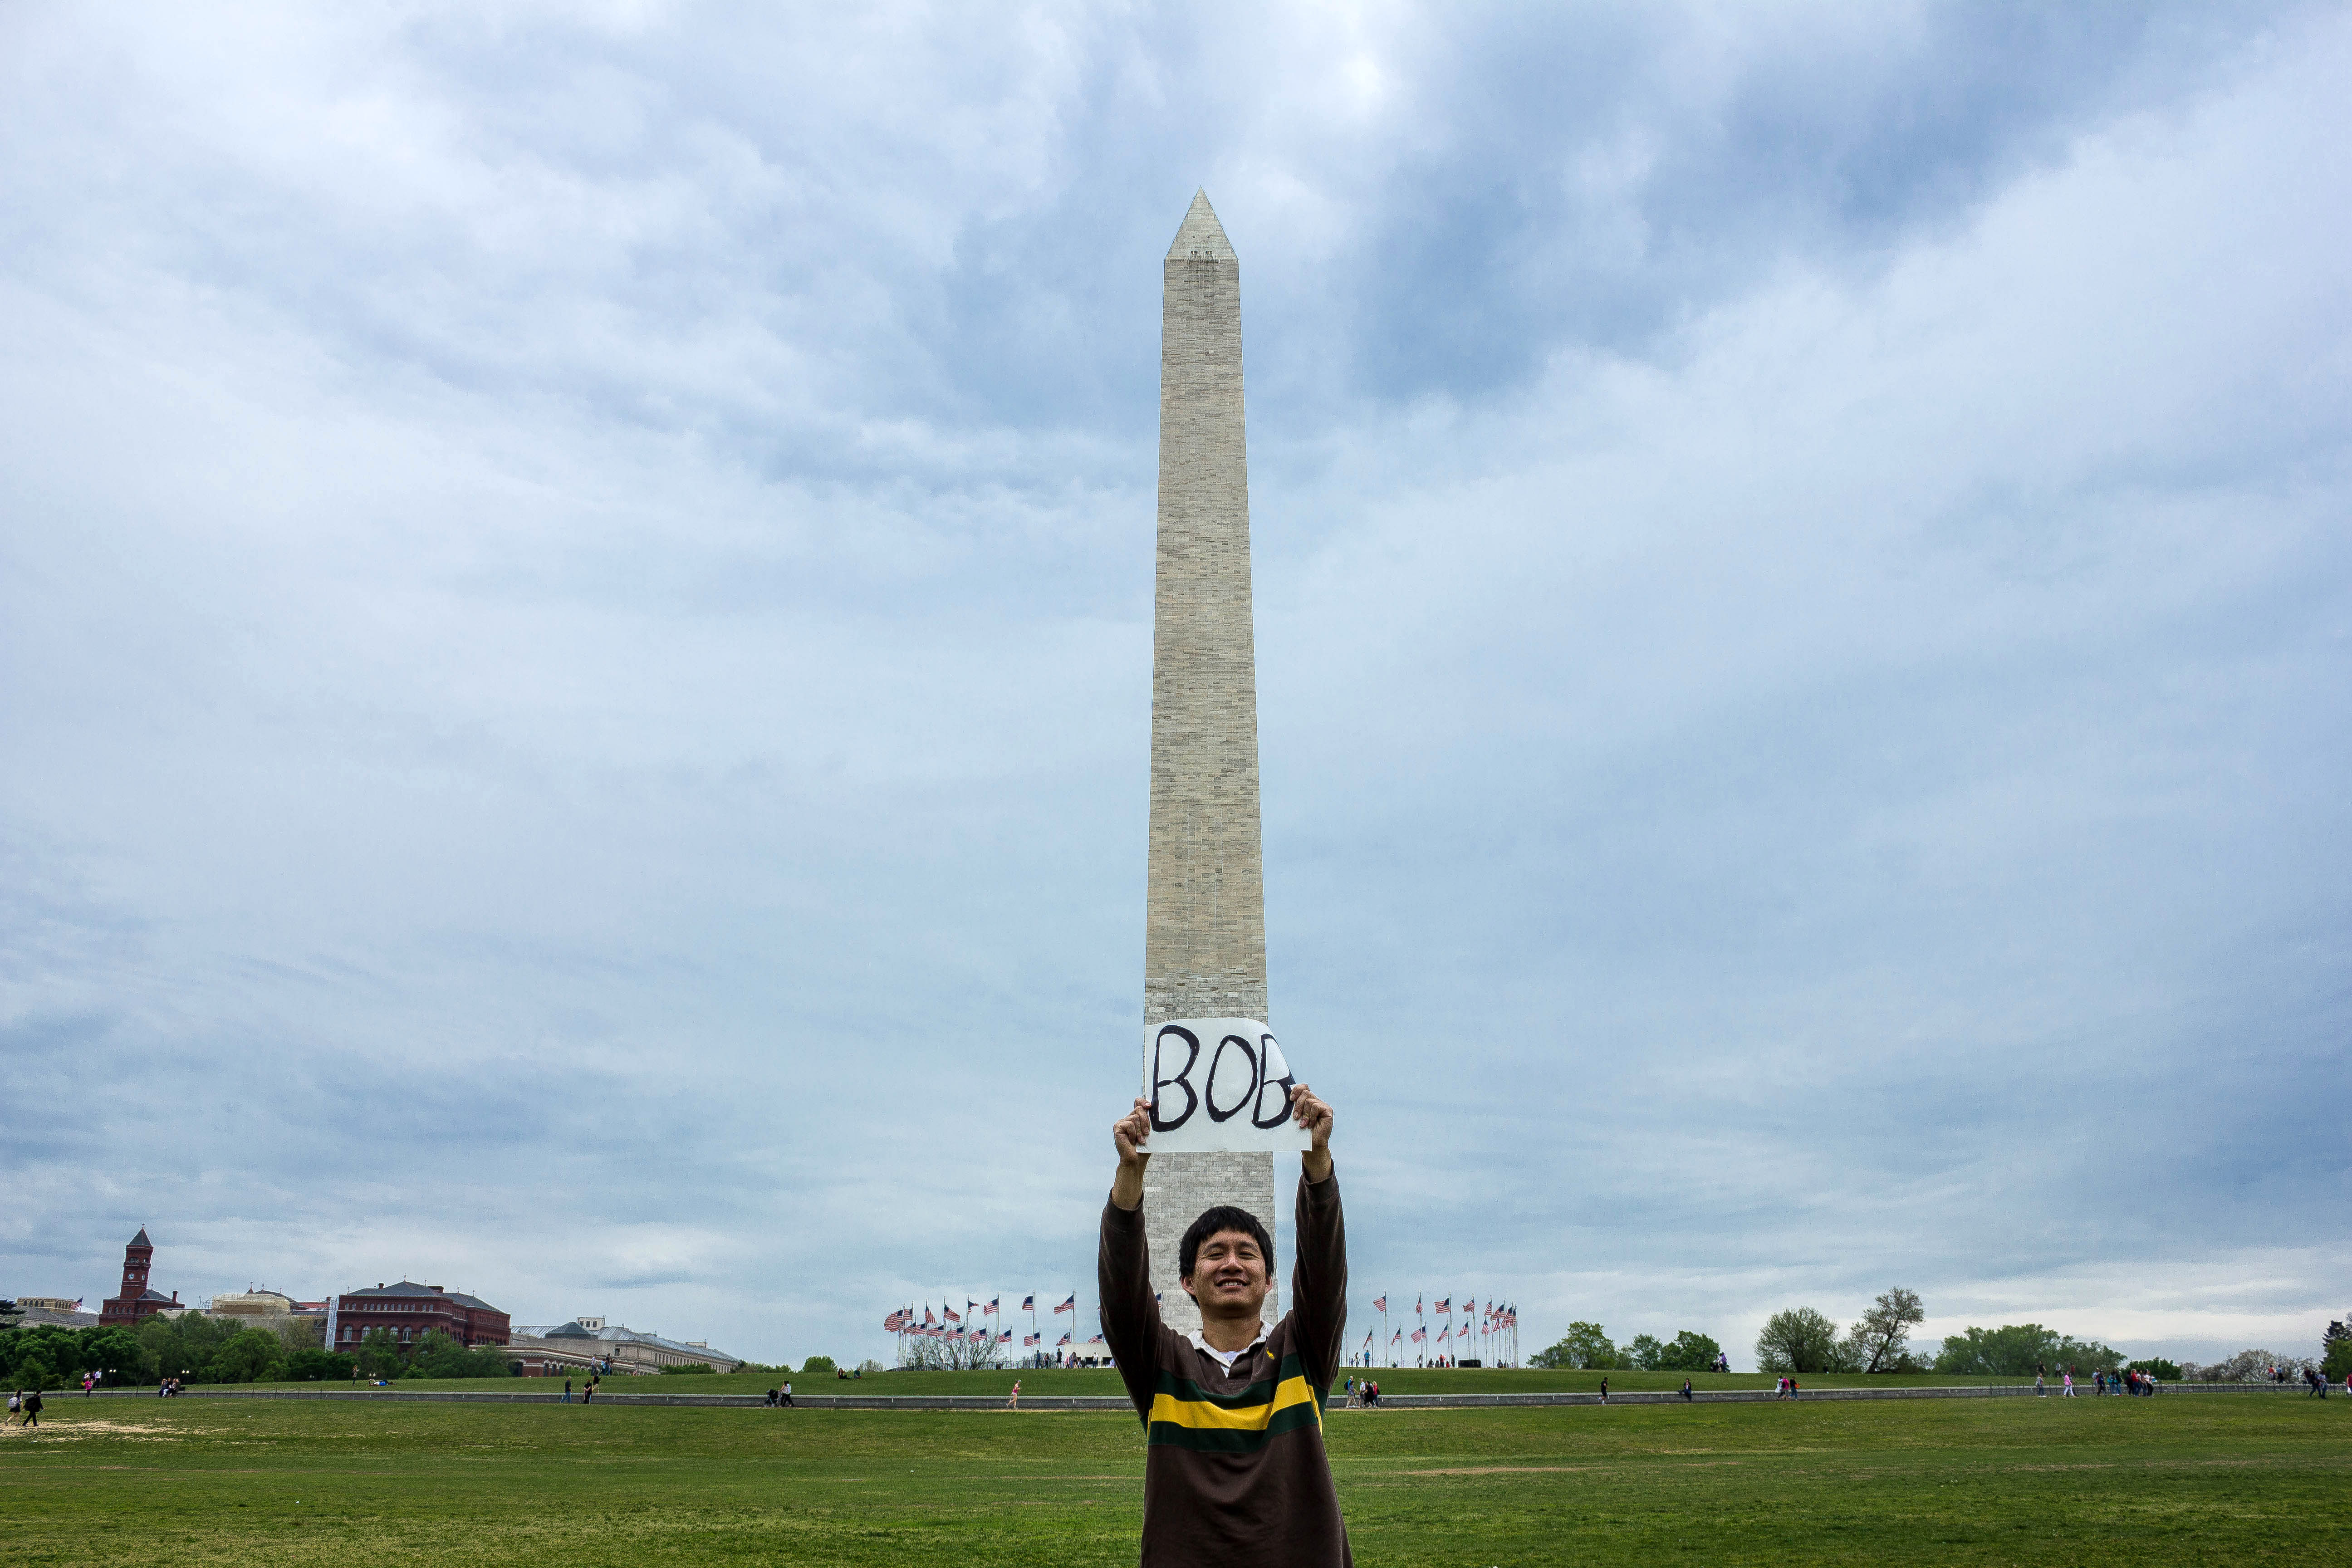 Campaigning in front of the Washington Monument image - Free stock ...